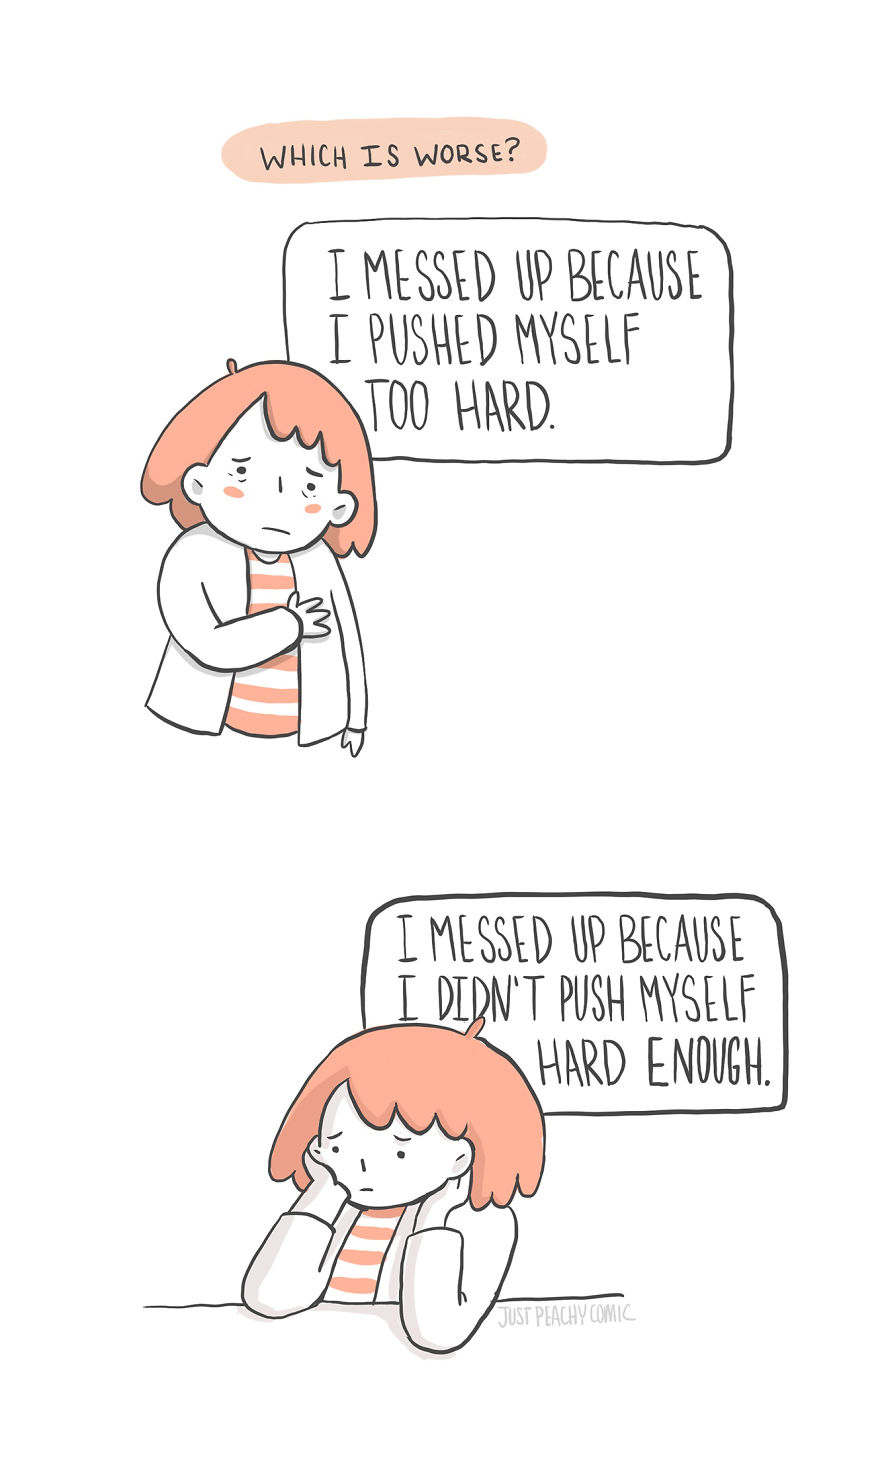 These Comics Perfectly Describe What It's Like To Have Depression And Anxiety